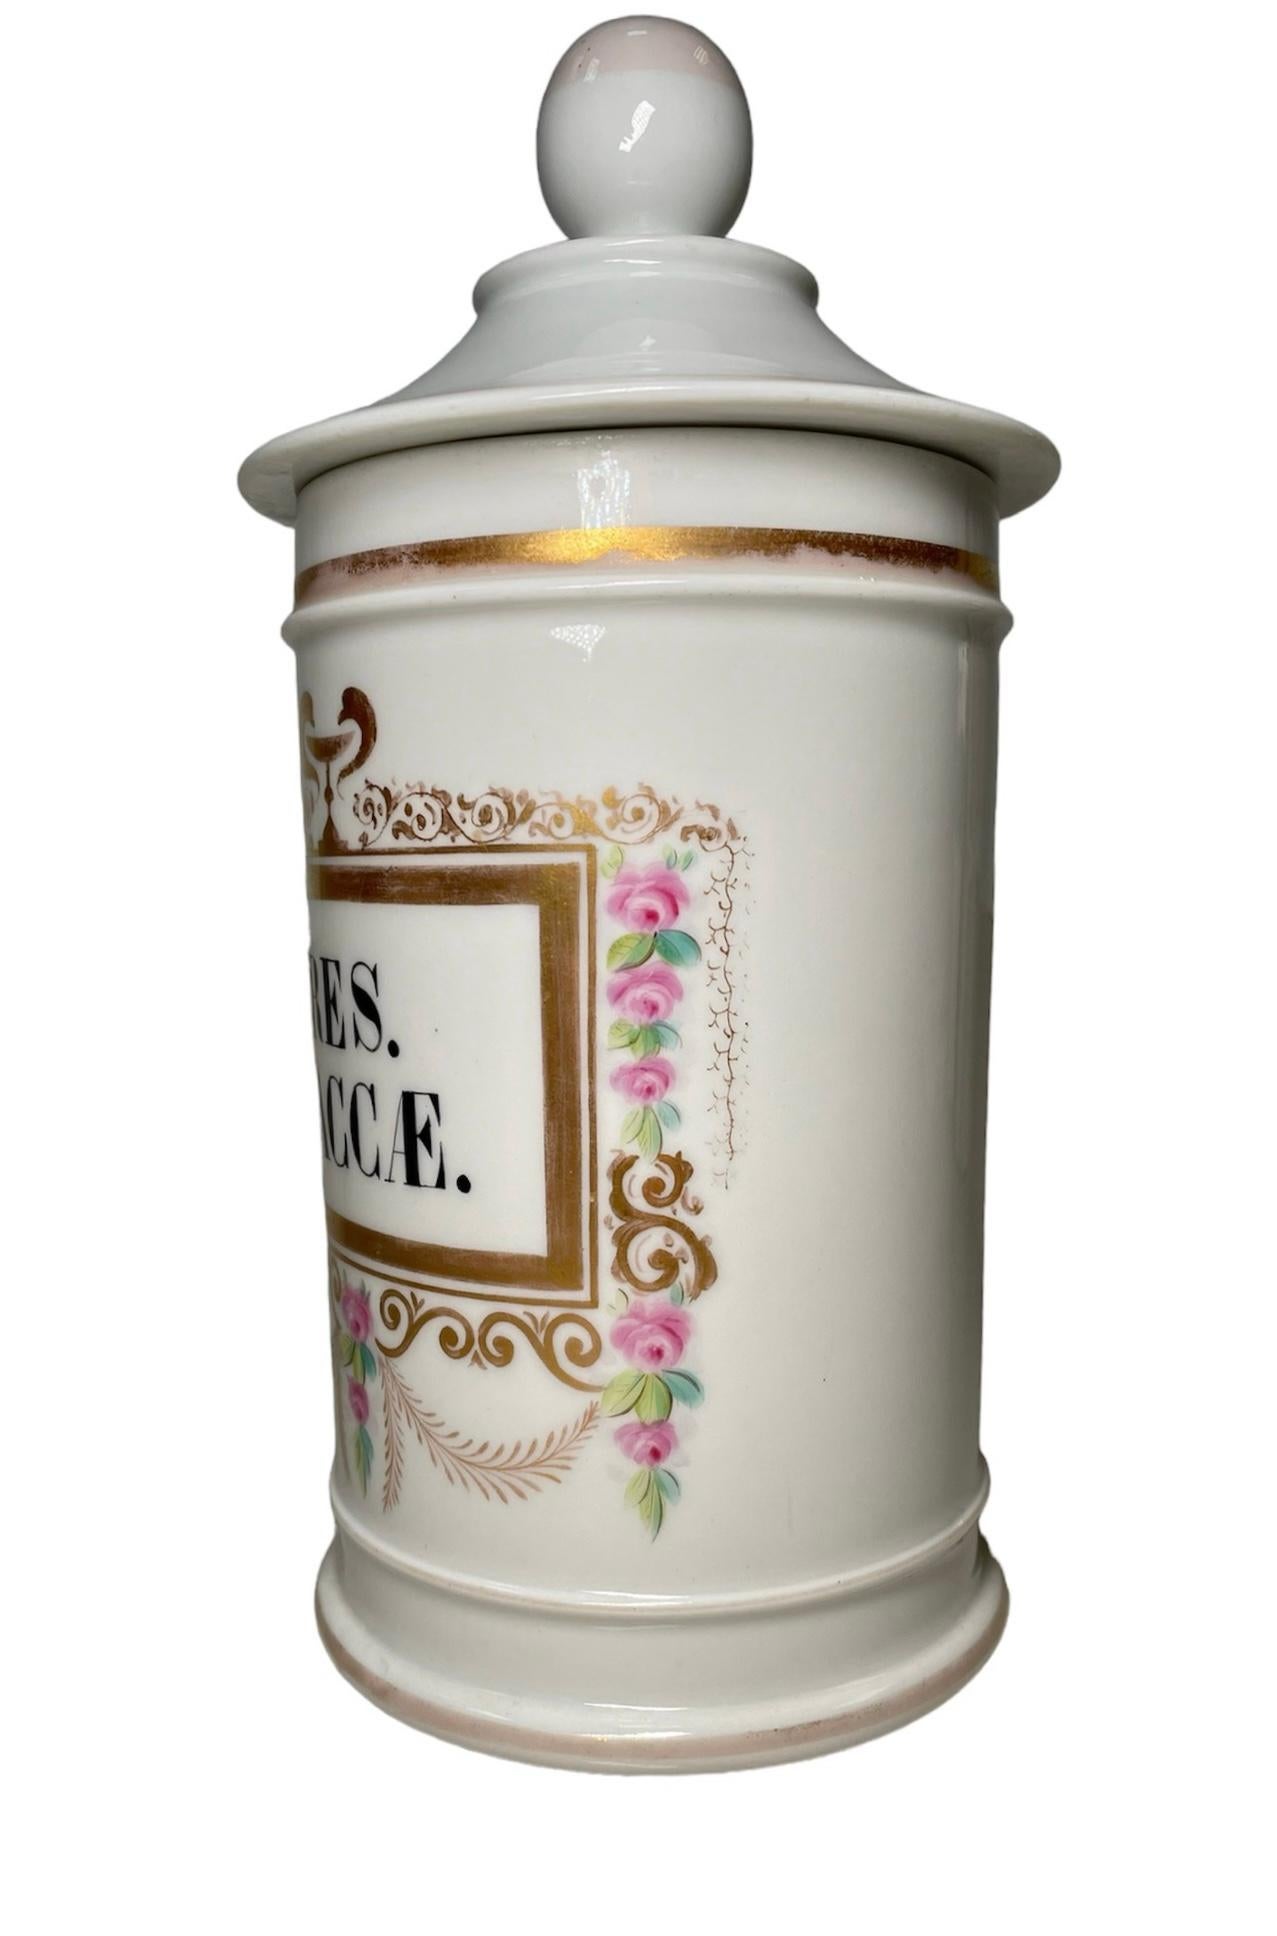 Porcelain Apothecary Jar In Good Condition For Sale In Guaynabo, PR